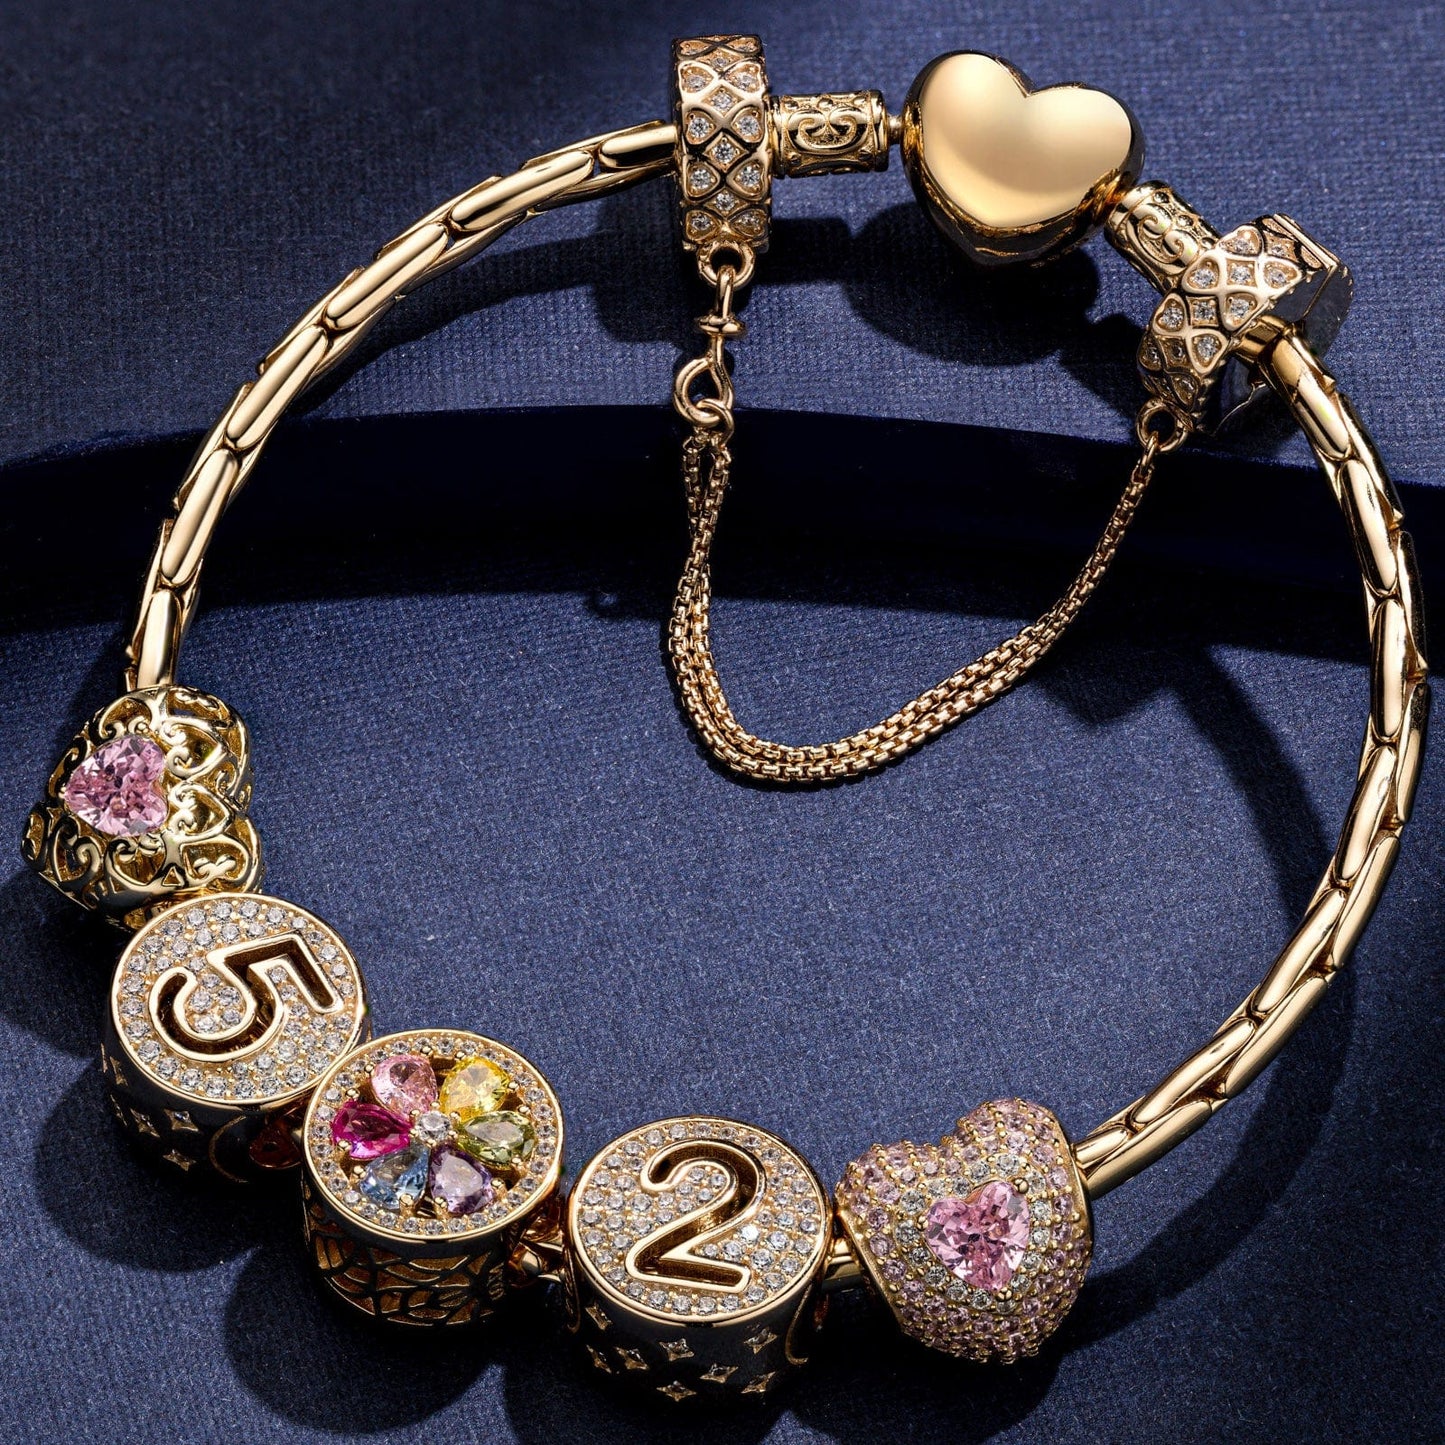 Sterling Silver Romantic Heart October Birthstone Charms Bracelet Set With Enamel In 14K Gold Plated